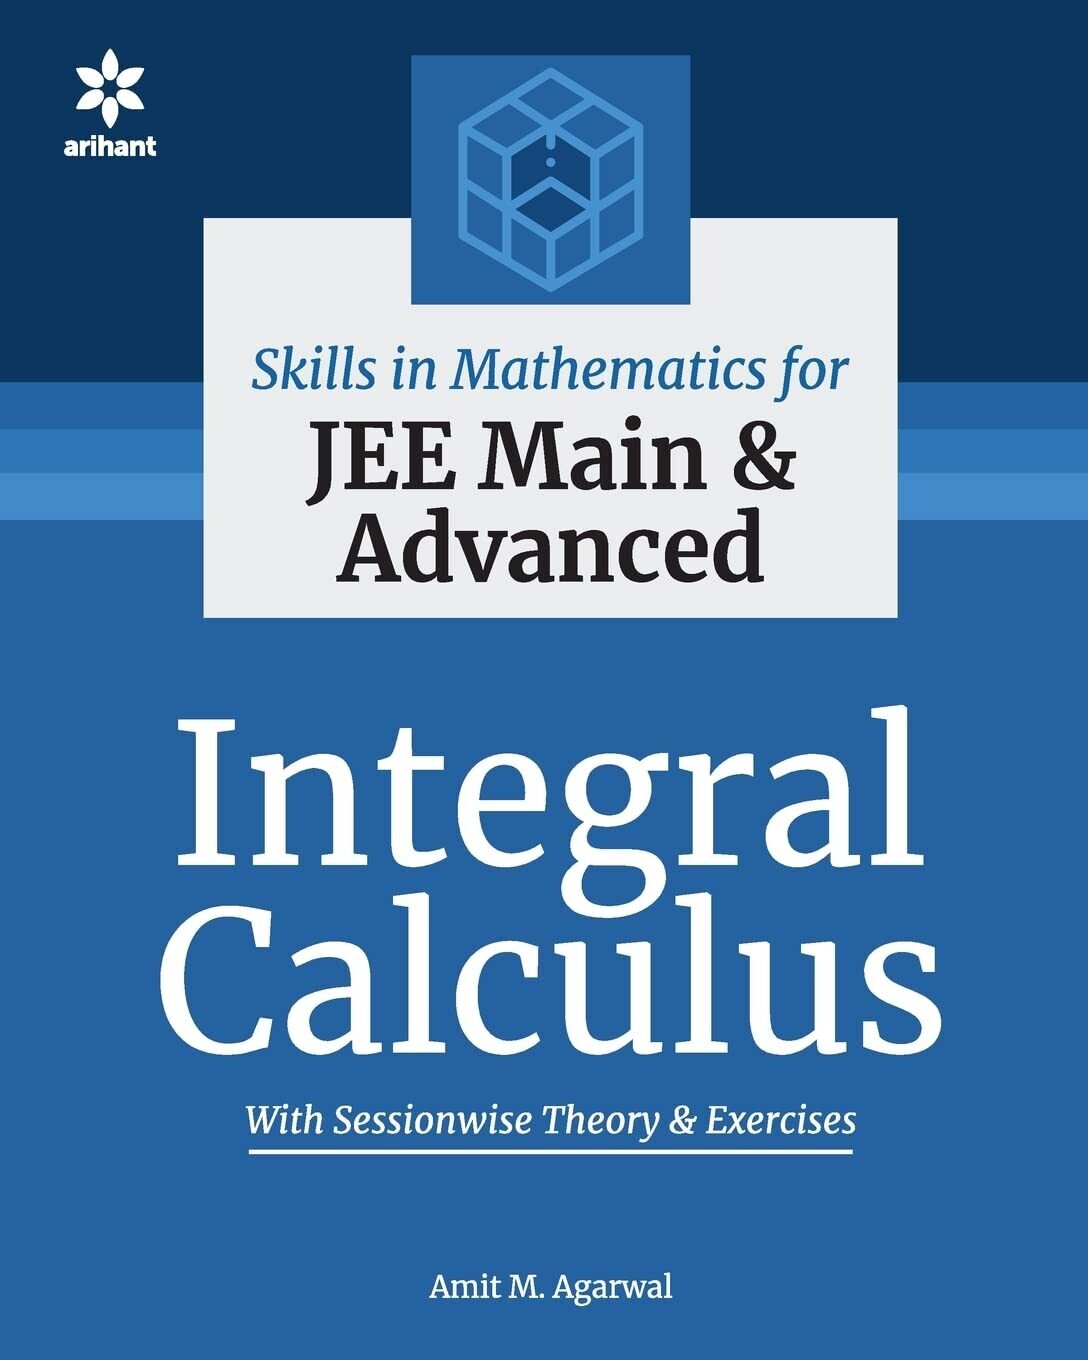 Skills in Mathematics - Integral Calculus for JEE Main and Advanced by Amit M. Agarwal